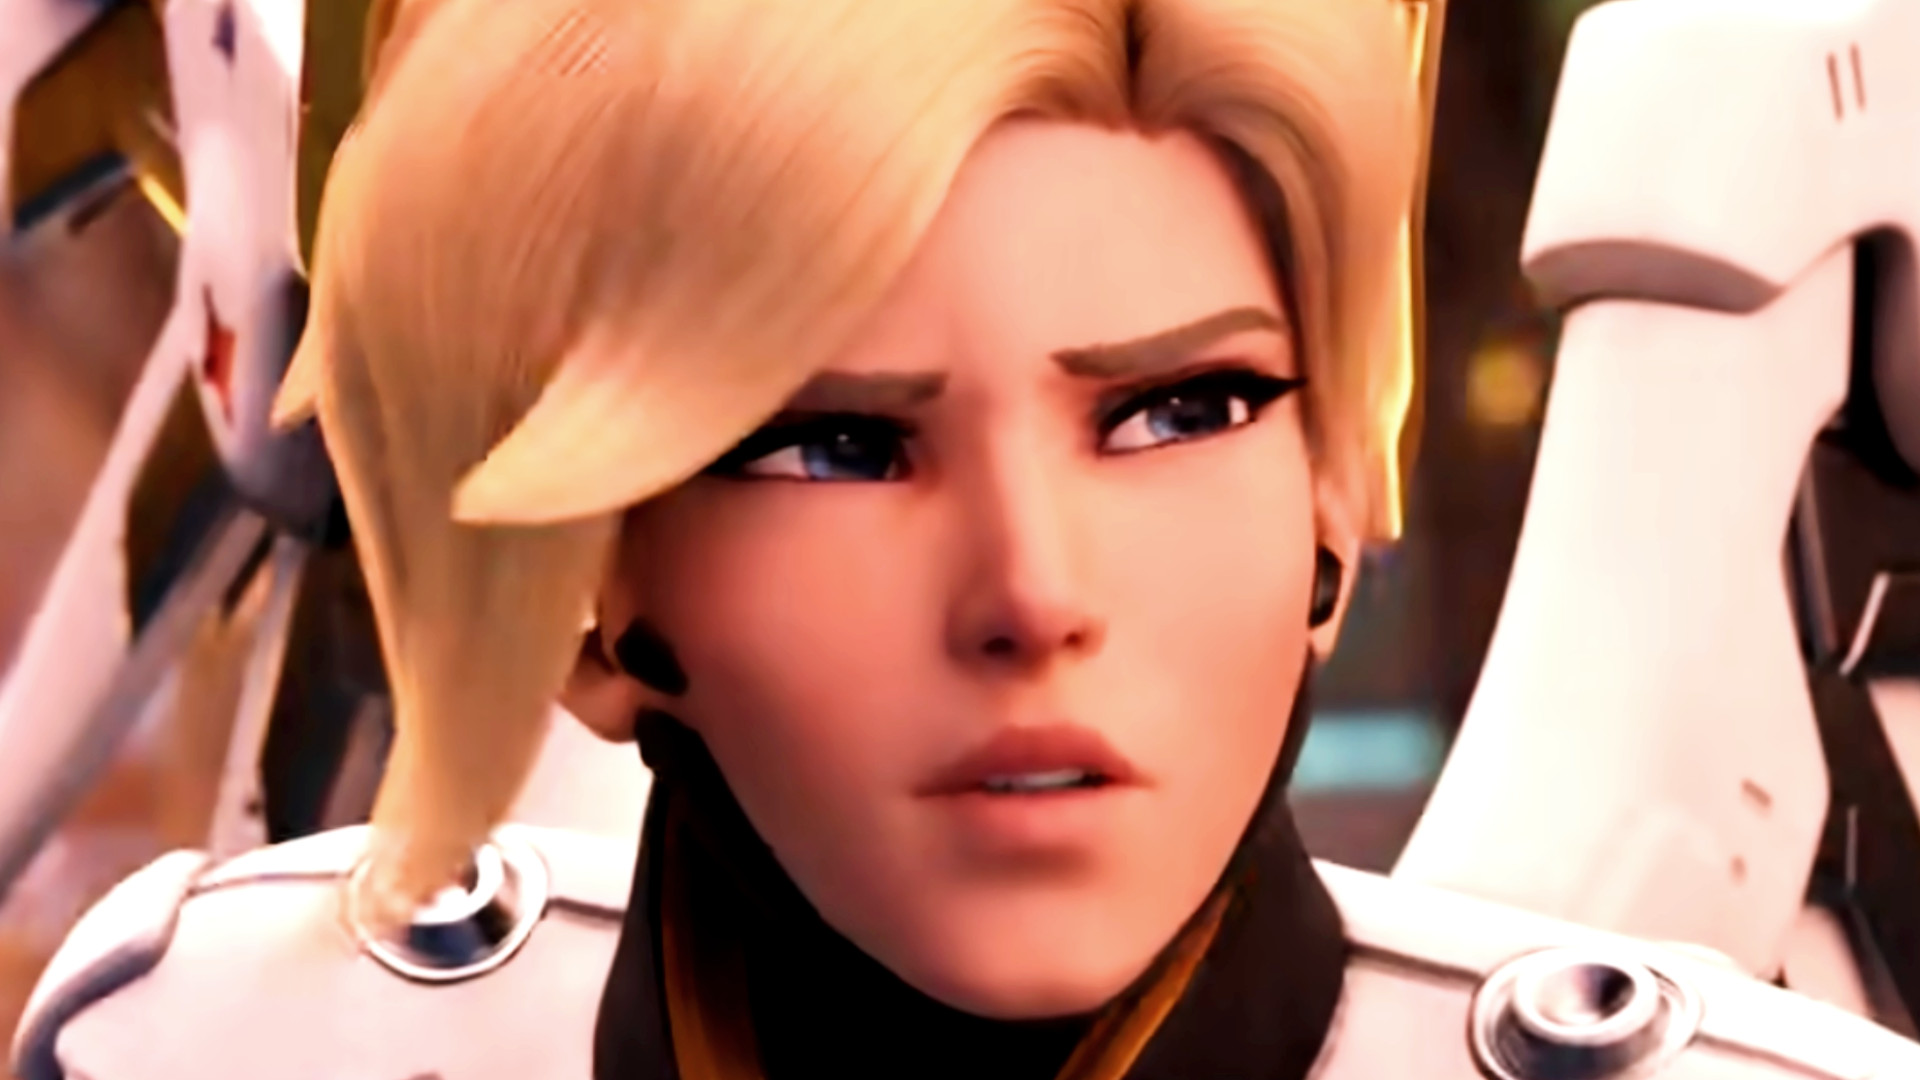 Overwatch 2 support changes lead with Mercy damage boost nerf